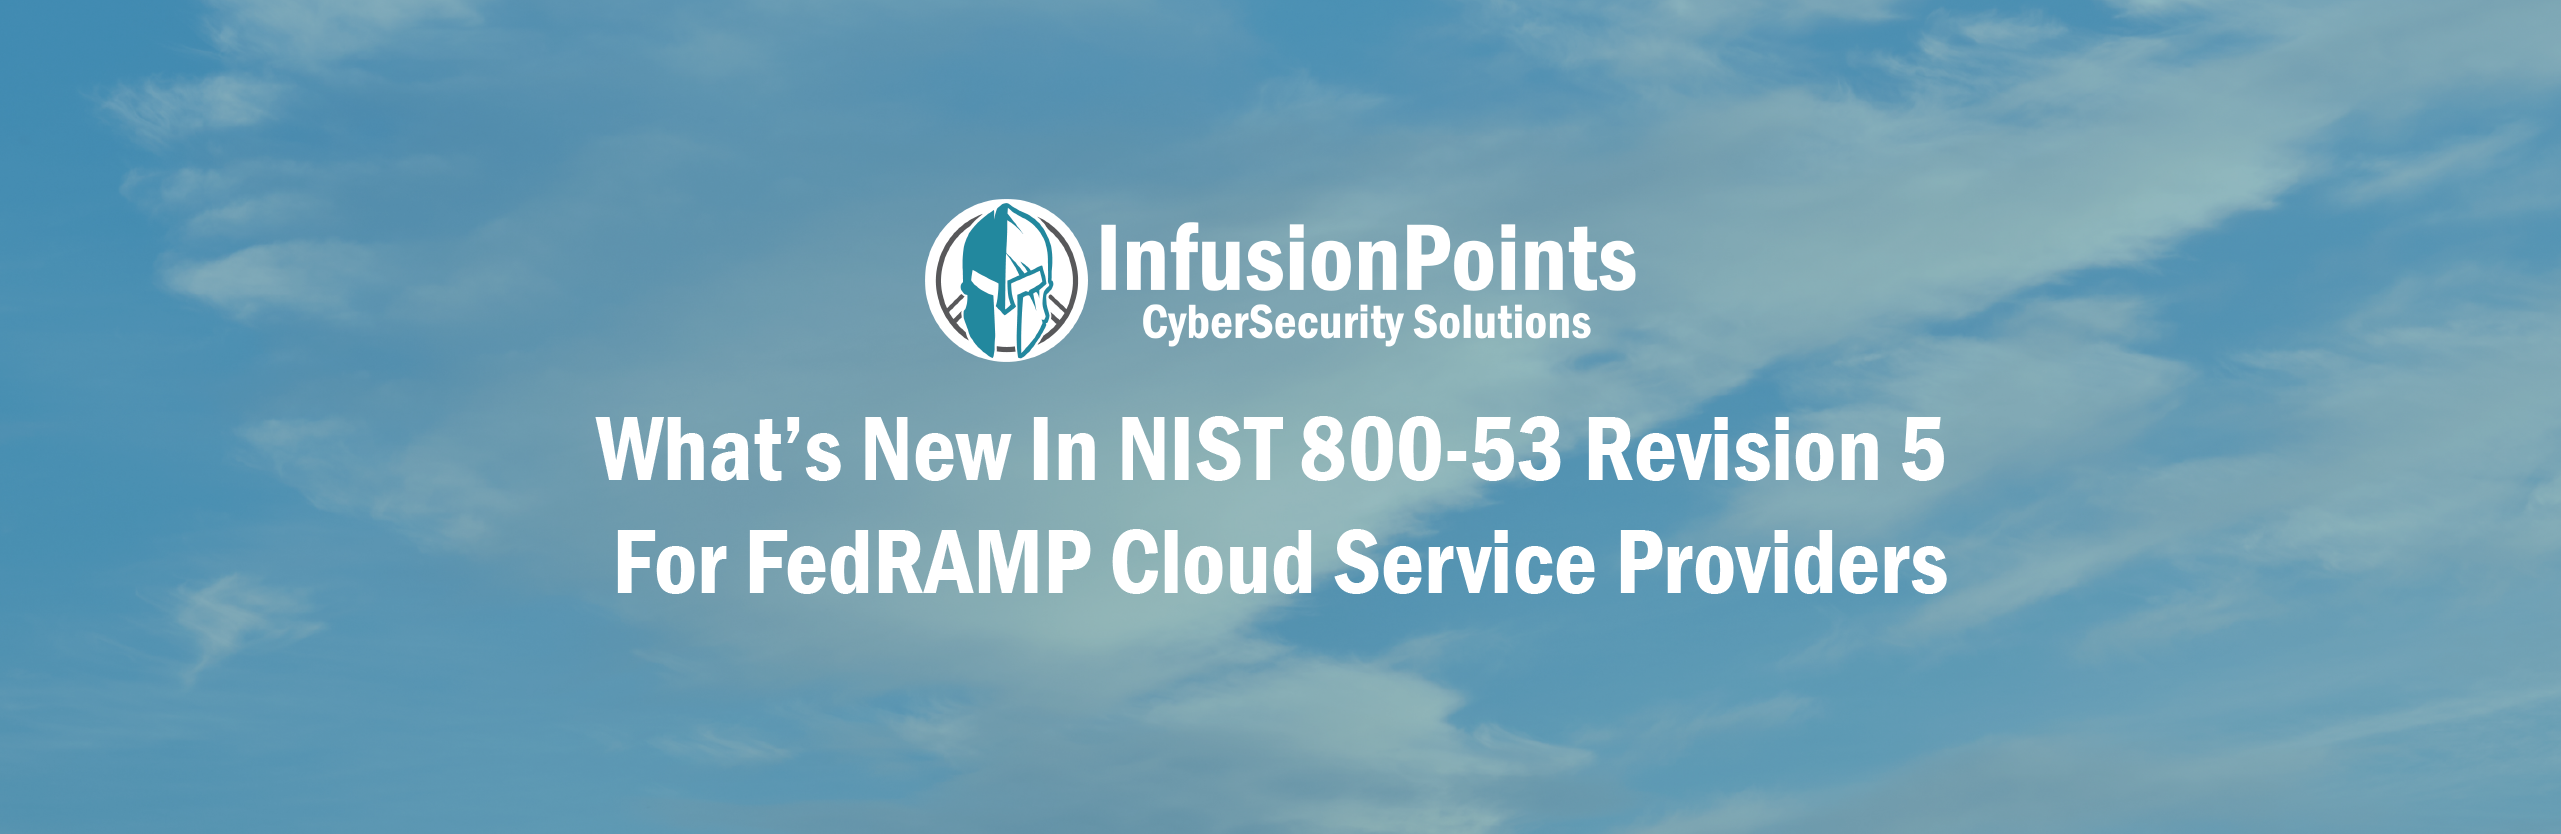 What’s New In NIST 800-53 Revision 5 For FedRAMP Cloud Service Providers